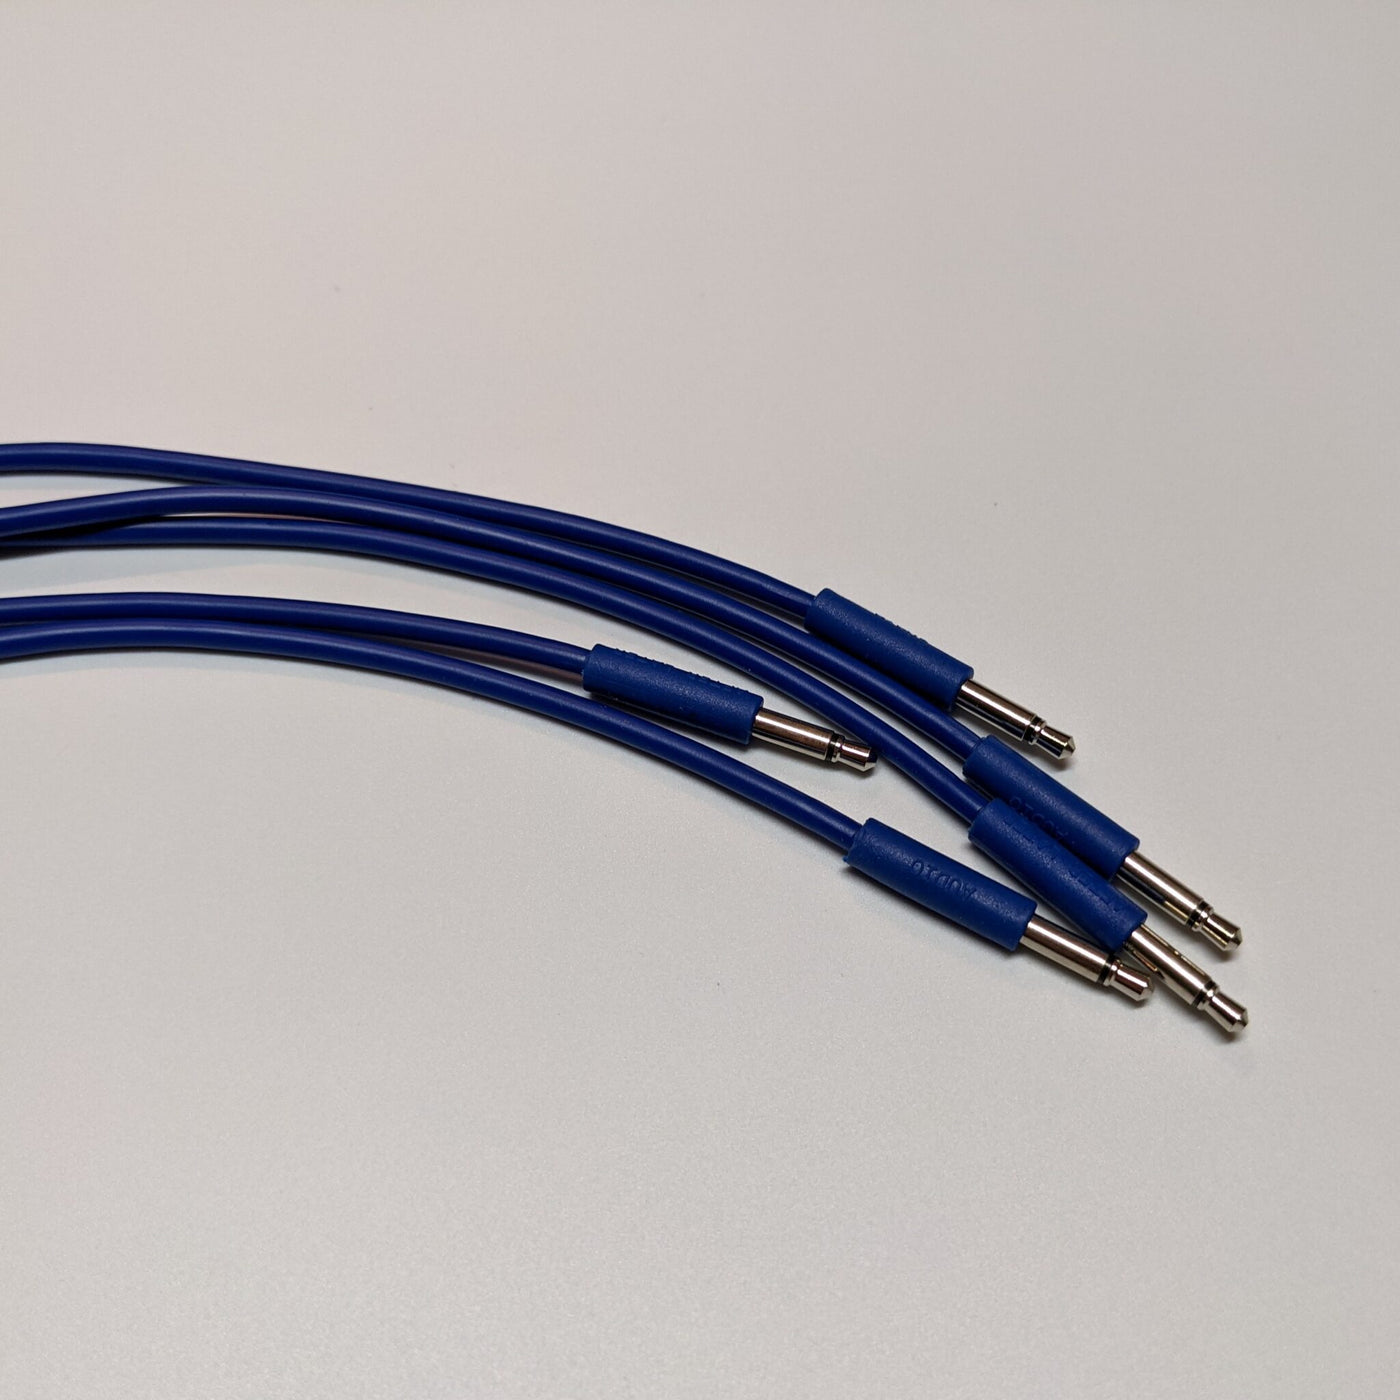 Skinny Patch Cables (18") - Pack of 5